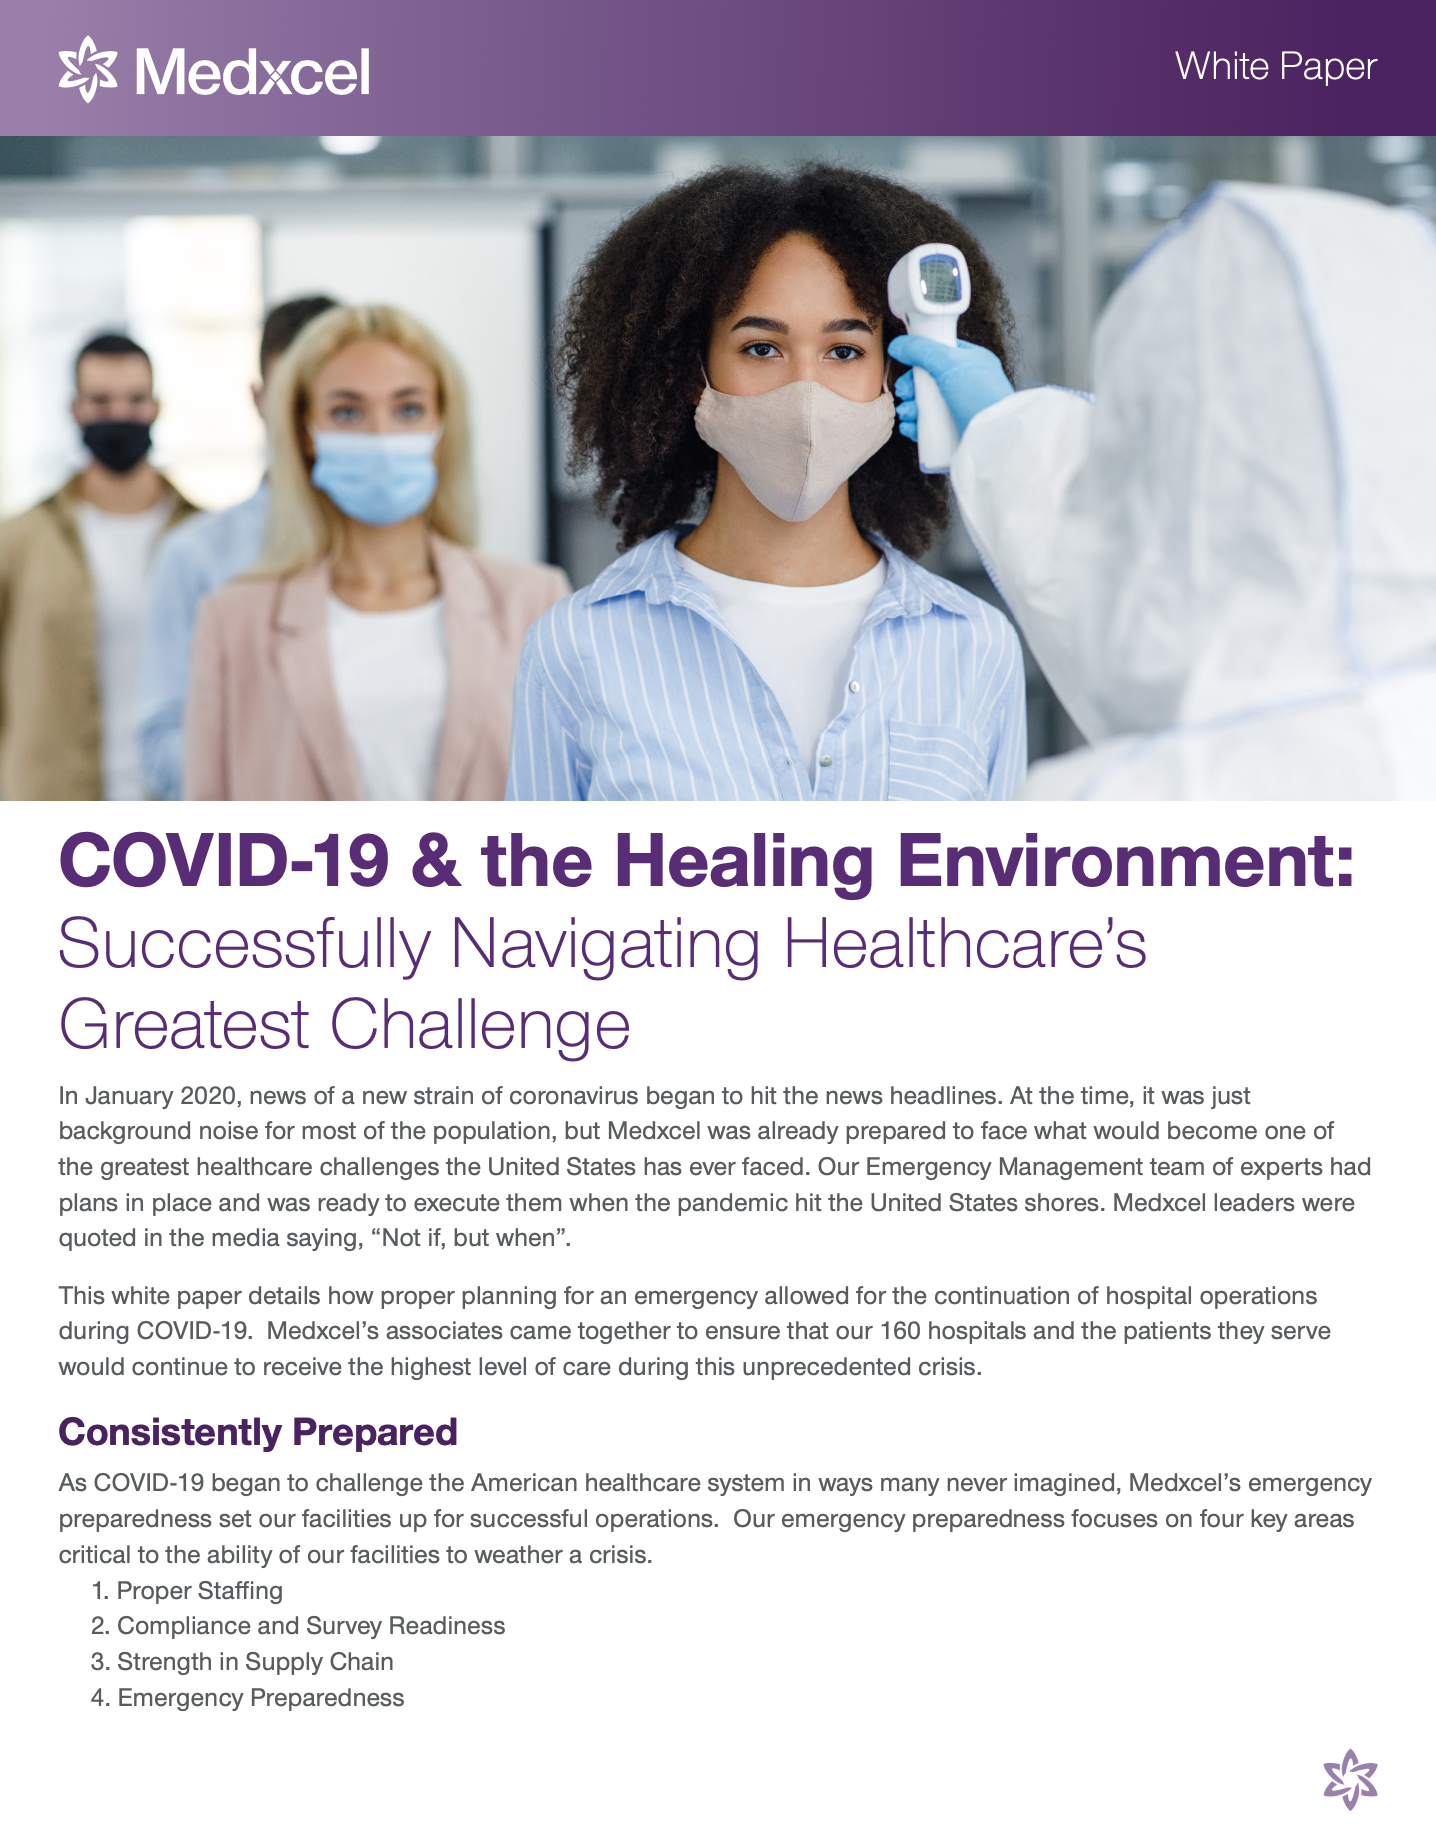 Download COVID-19 & the Healing Environment Whitepaper